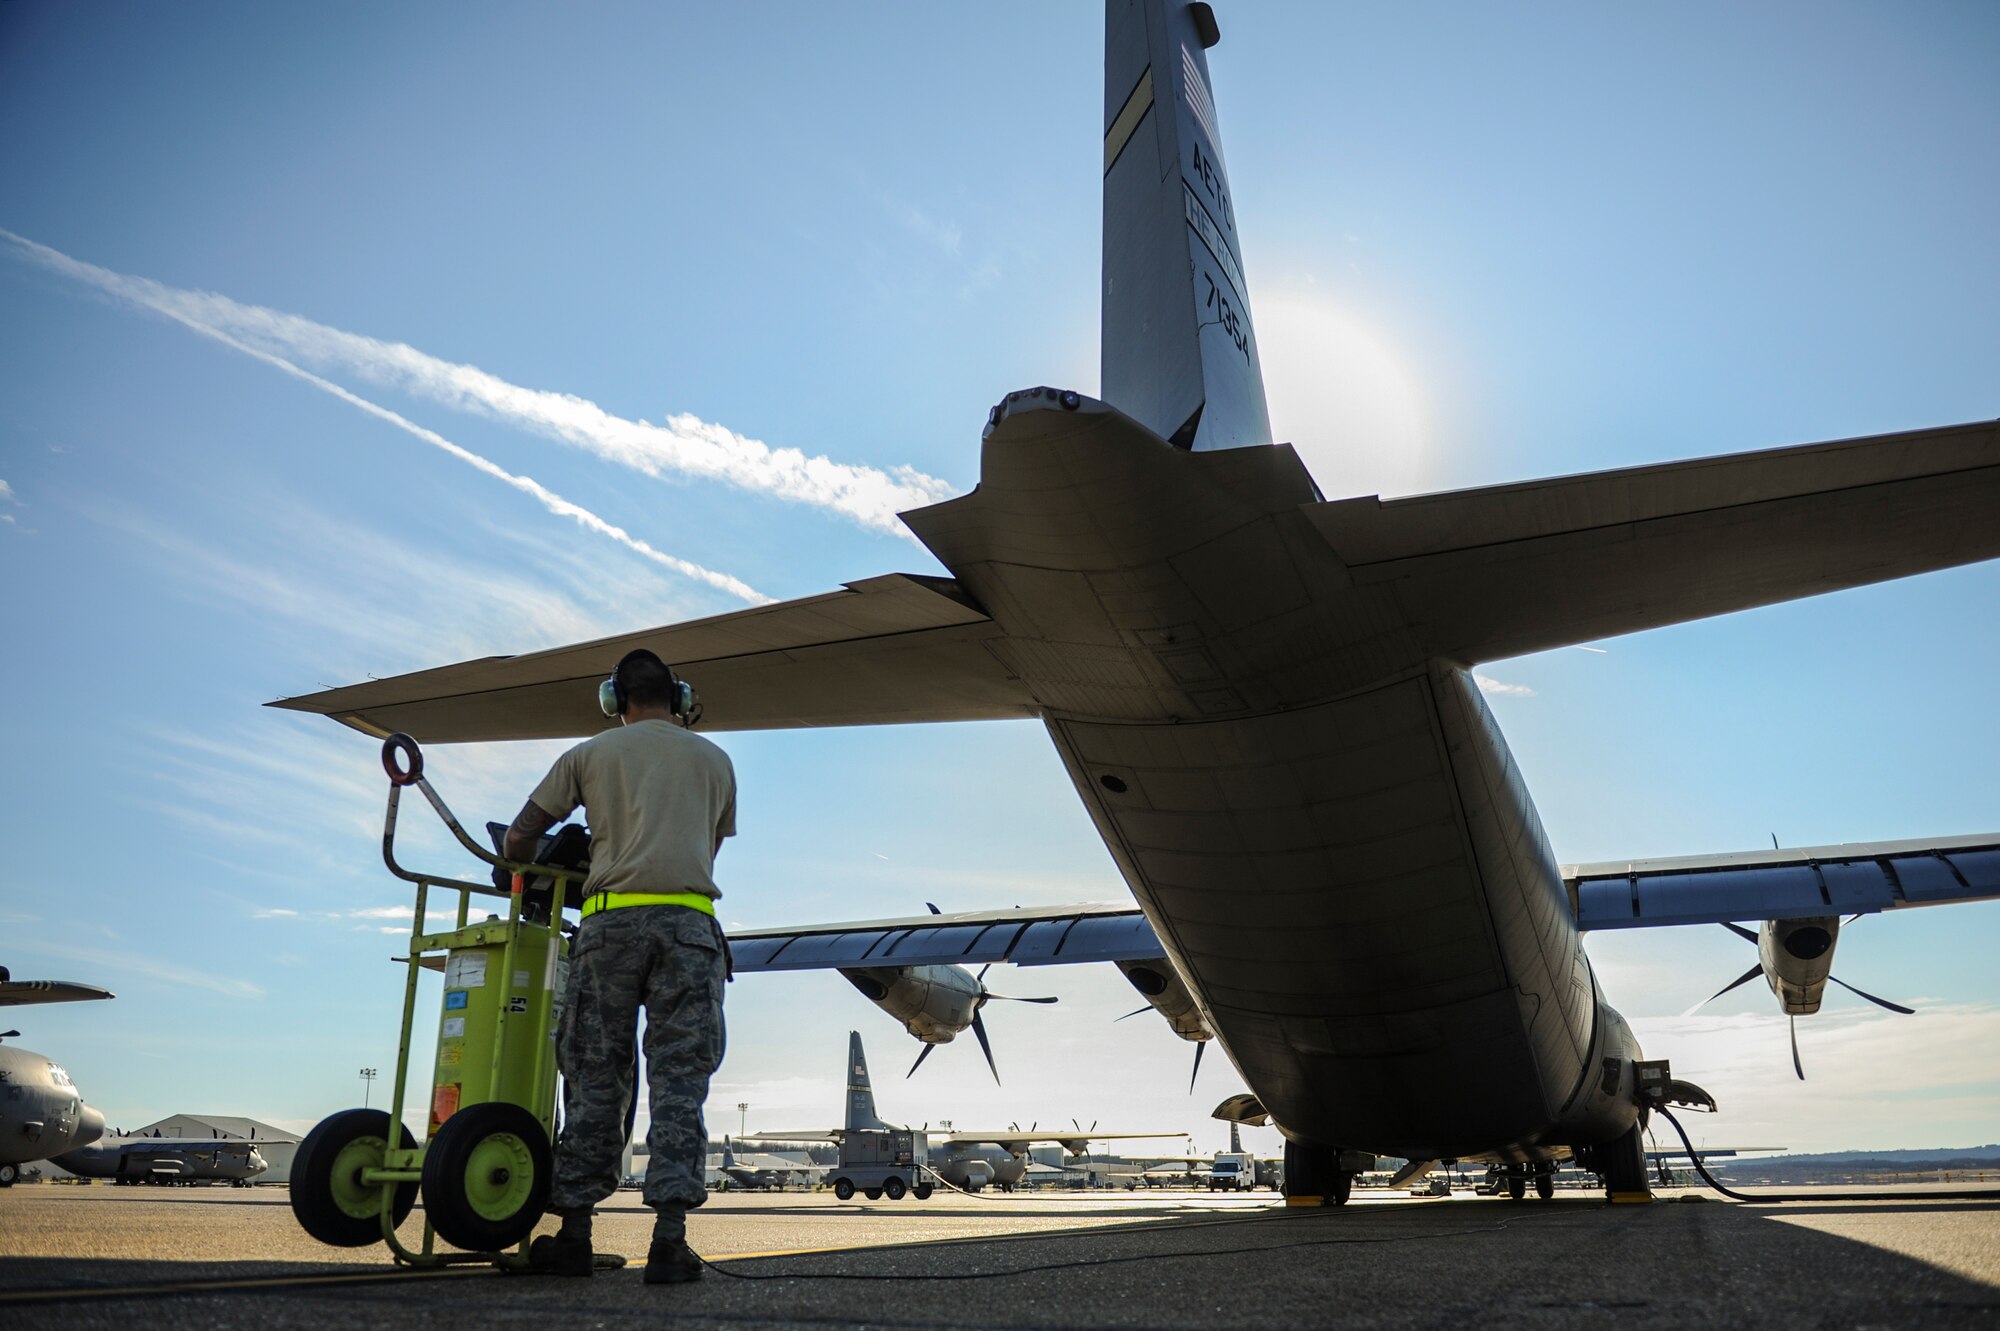 U.S. Air Force Senior Airman Michael Sakahara, a 314th Aircraft Maintenance Squadron C-130J crew chief, performs a component inspection on a C-130J March 2, 2016, at Little Rock Air Force Base, Ark. The Rock is home to the largest C-130 fleet in the world, 314th AMXS maintainers certify all aircraft are safe, functioning properly and ready to meet training and operational requirements. By providing mission ready aircraft, pilots in training receive essential flying hours that are necessary for graduation from the C-130 Center of Excellence.  (U.S. Air Force photo/Senior Airman Harry Brexel)